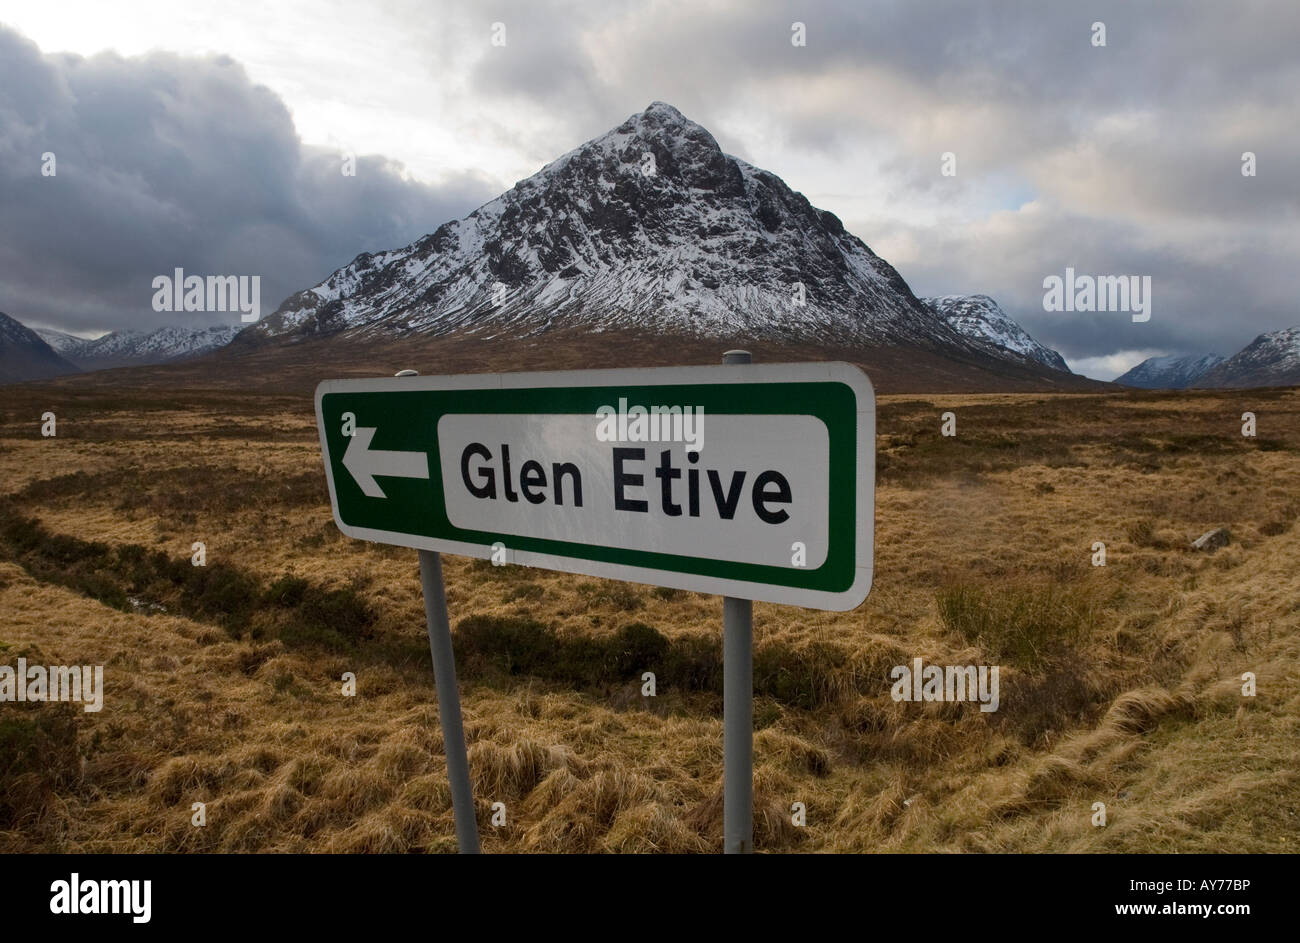 Sign post for Glen Etive on th A82 road, Buachaille Etive Mòr Mountain in the background Stock Photo